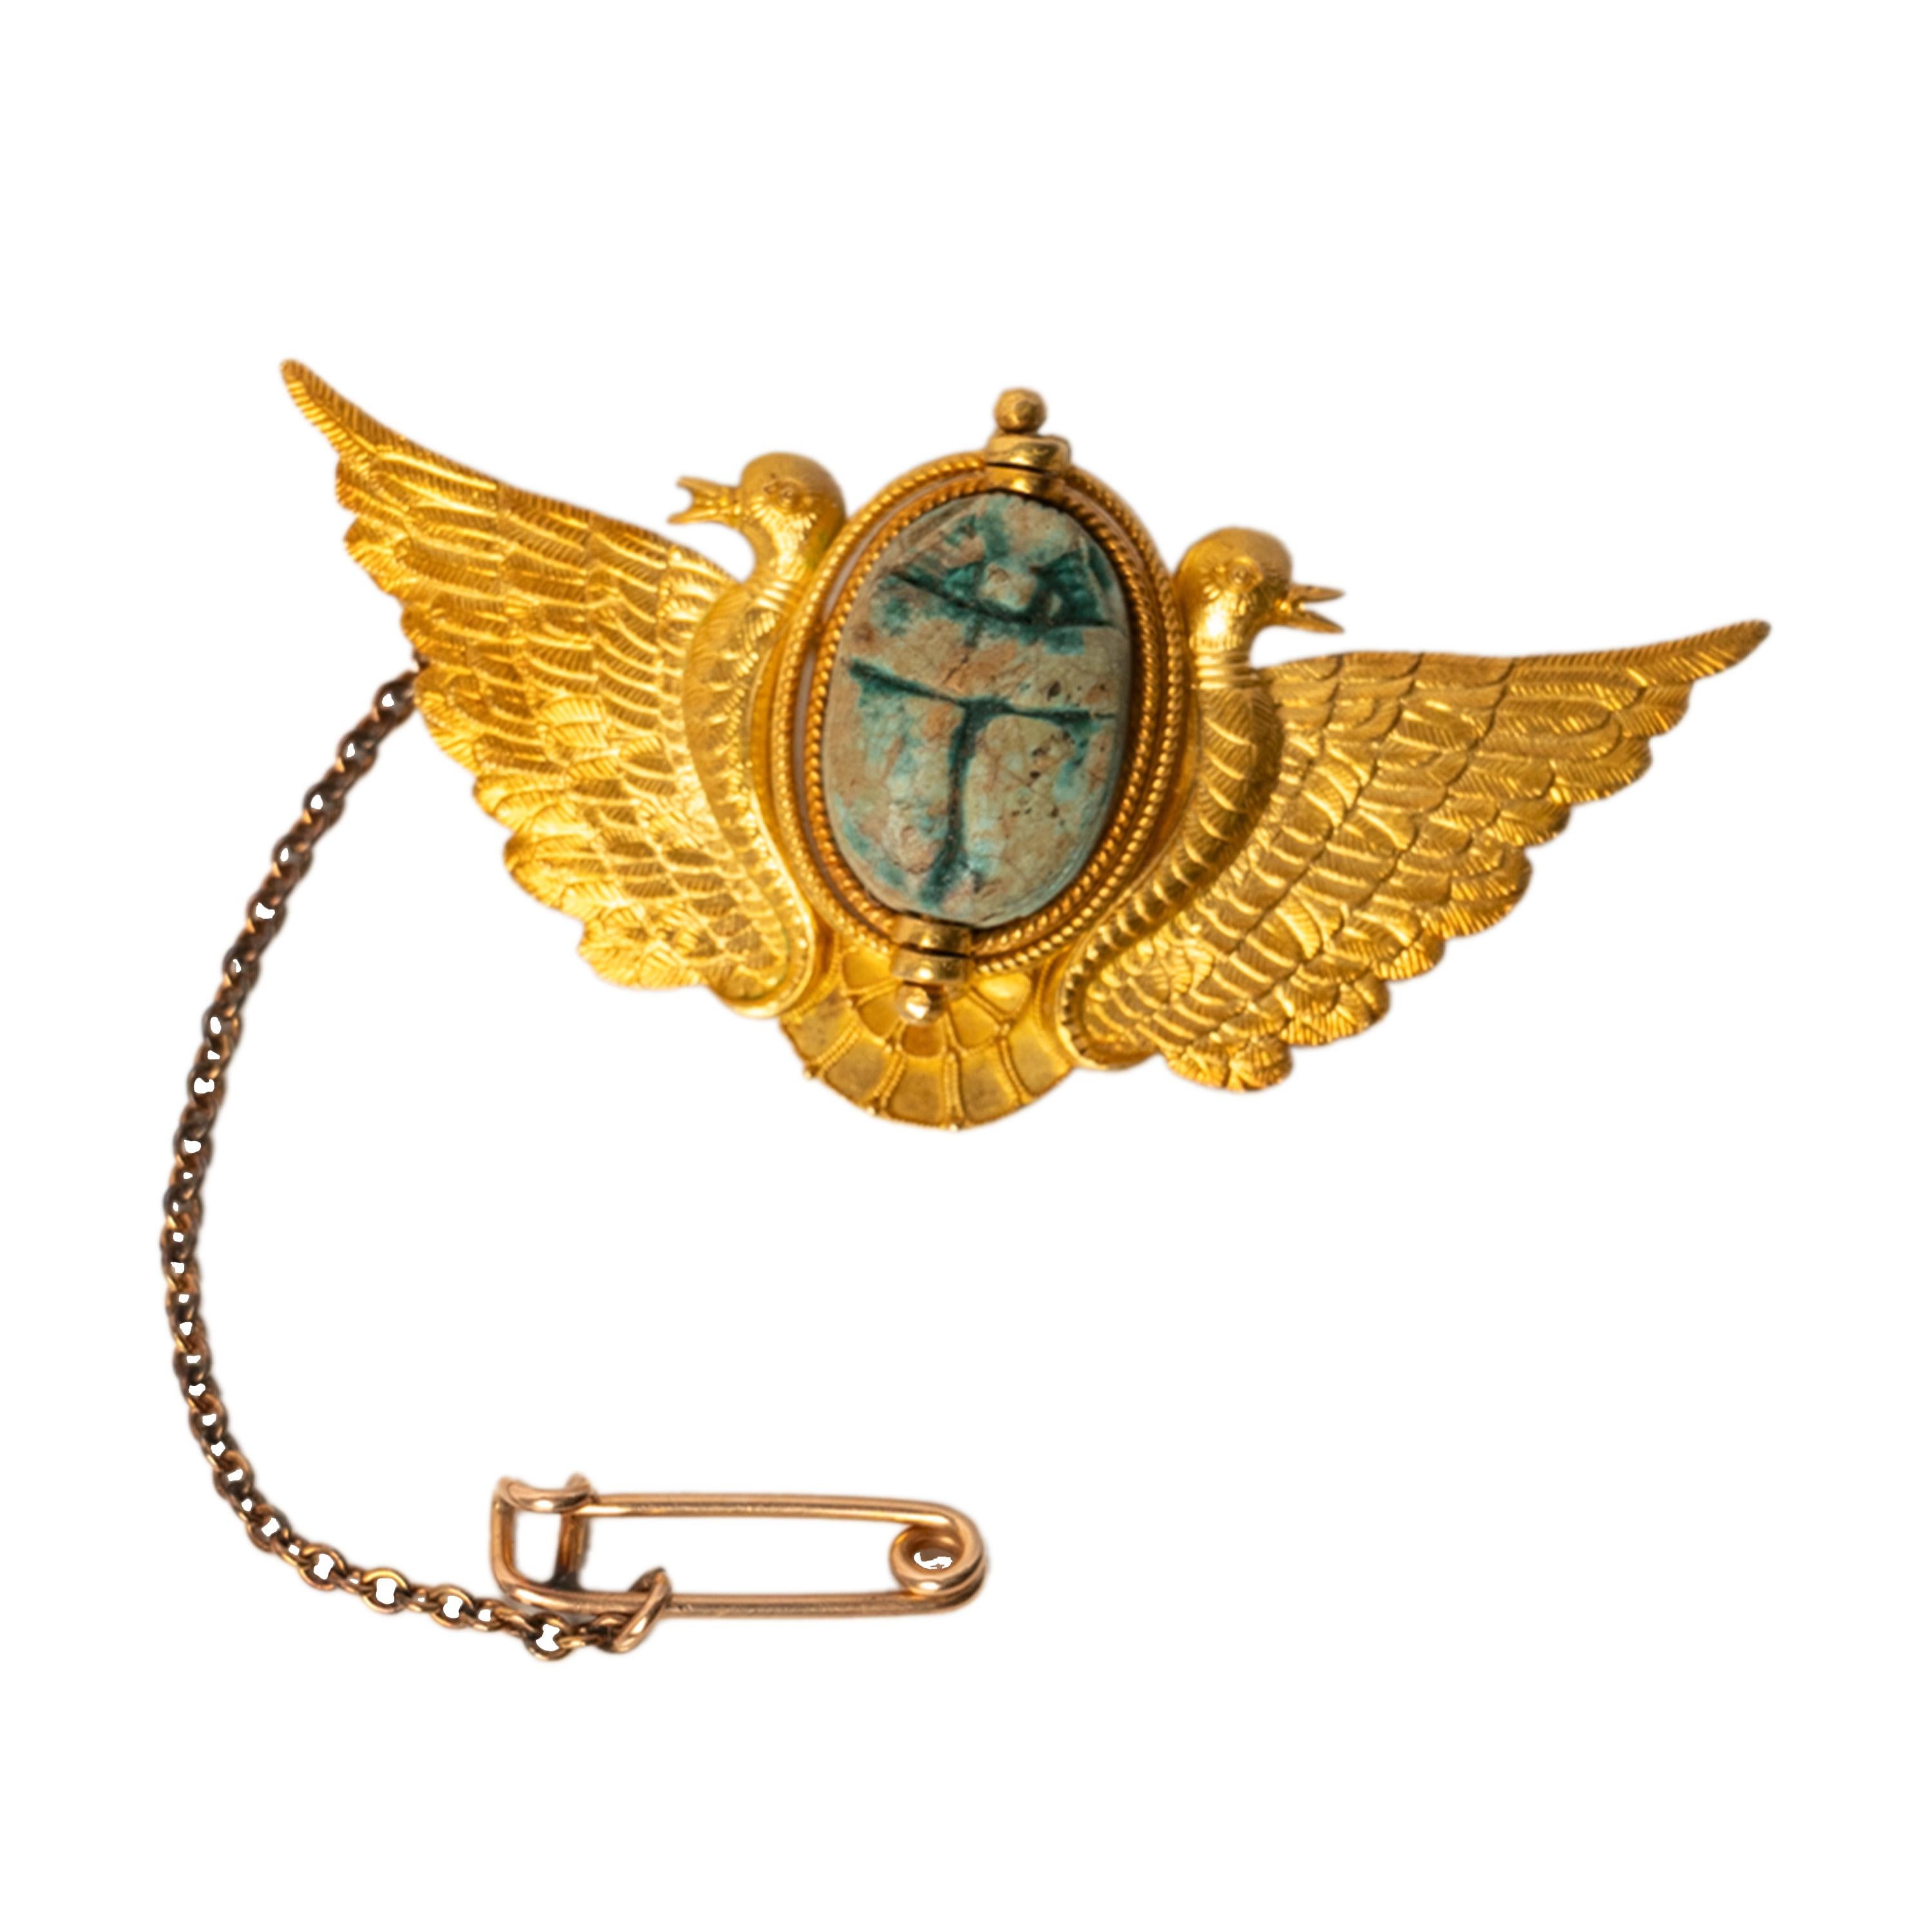 Antique 24 Karat Gold Egyptian Revival Scarab Pendant Brooch Cesare Tombini 1870 In Good Condition For Sale In Portland, OR